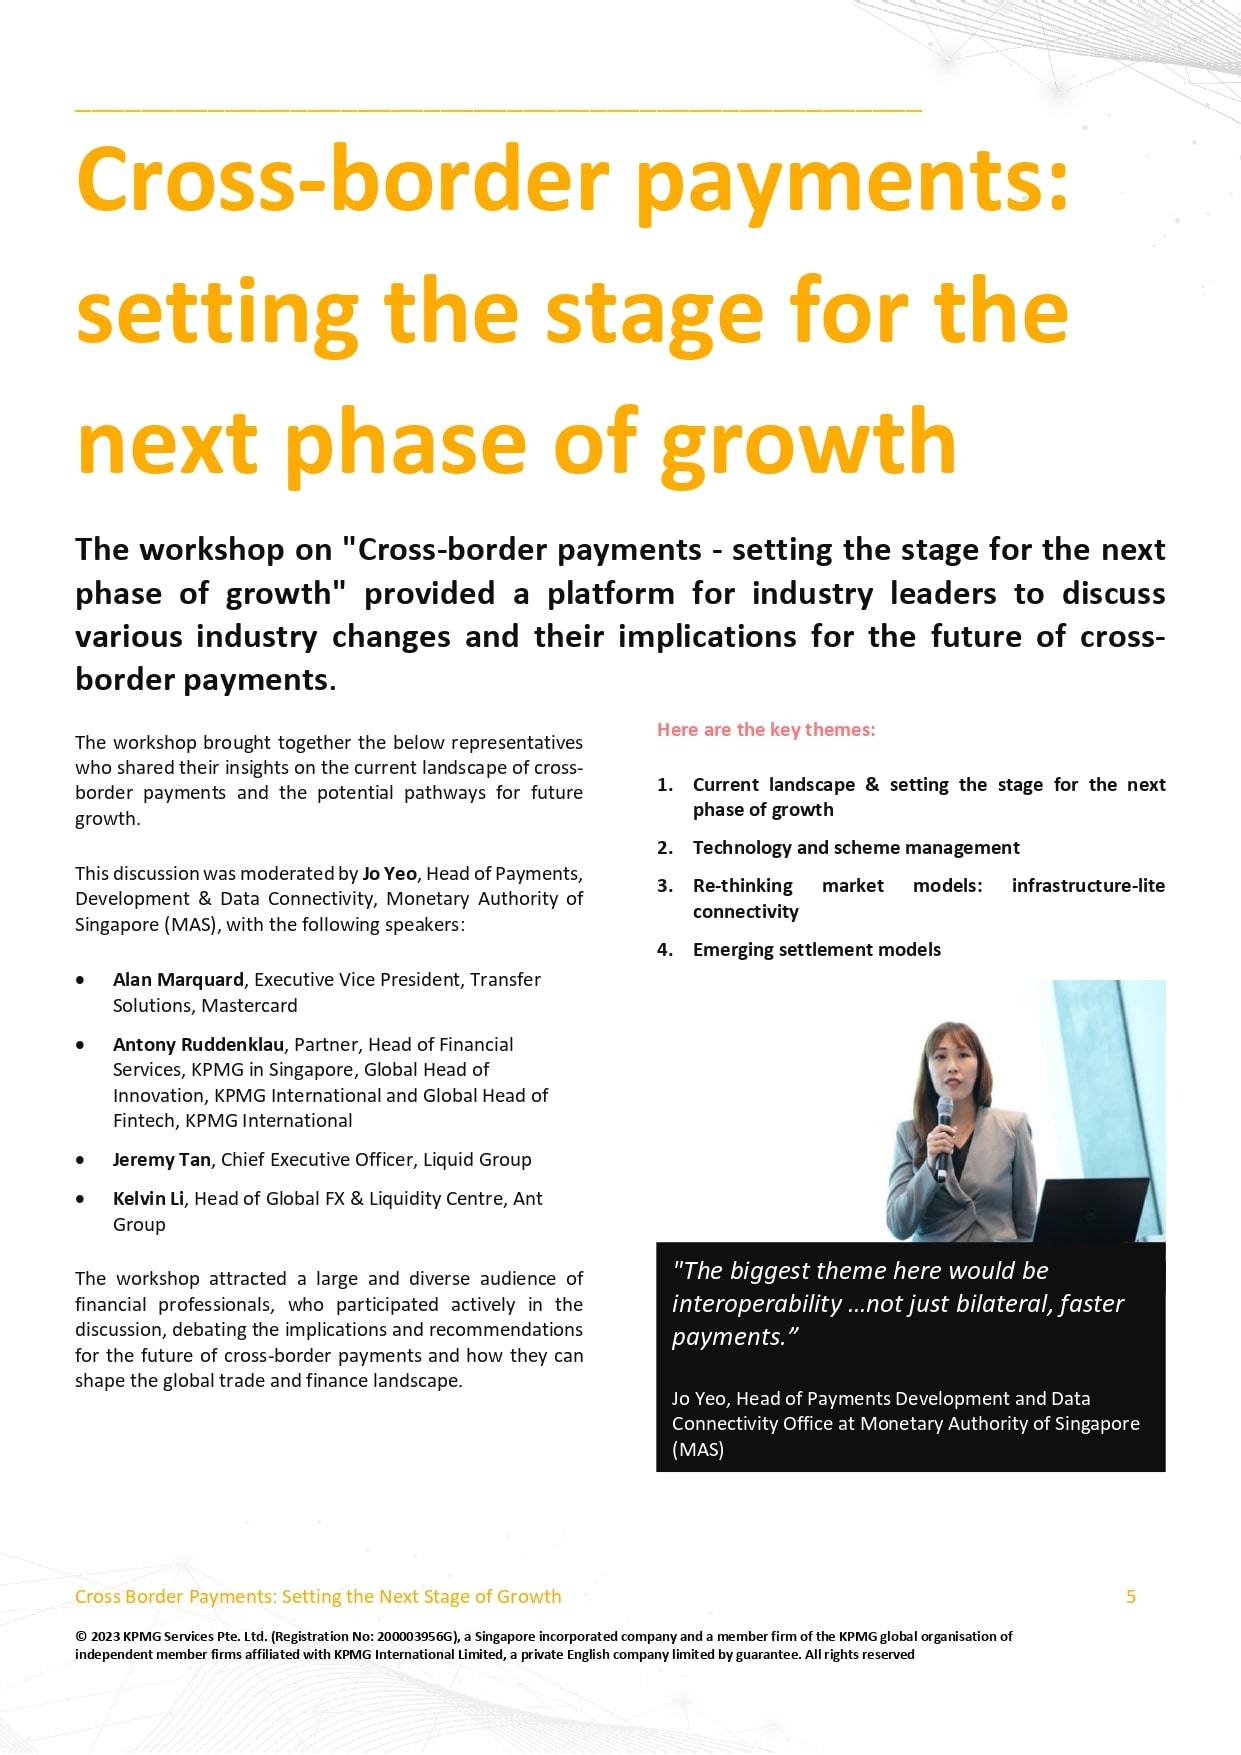 Cross_Border_Payments-Setting_the_Next_Stage_for_Growth_KPMG_PZF2023-5